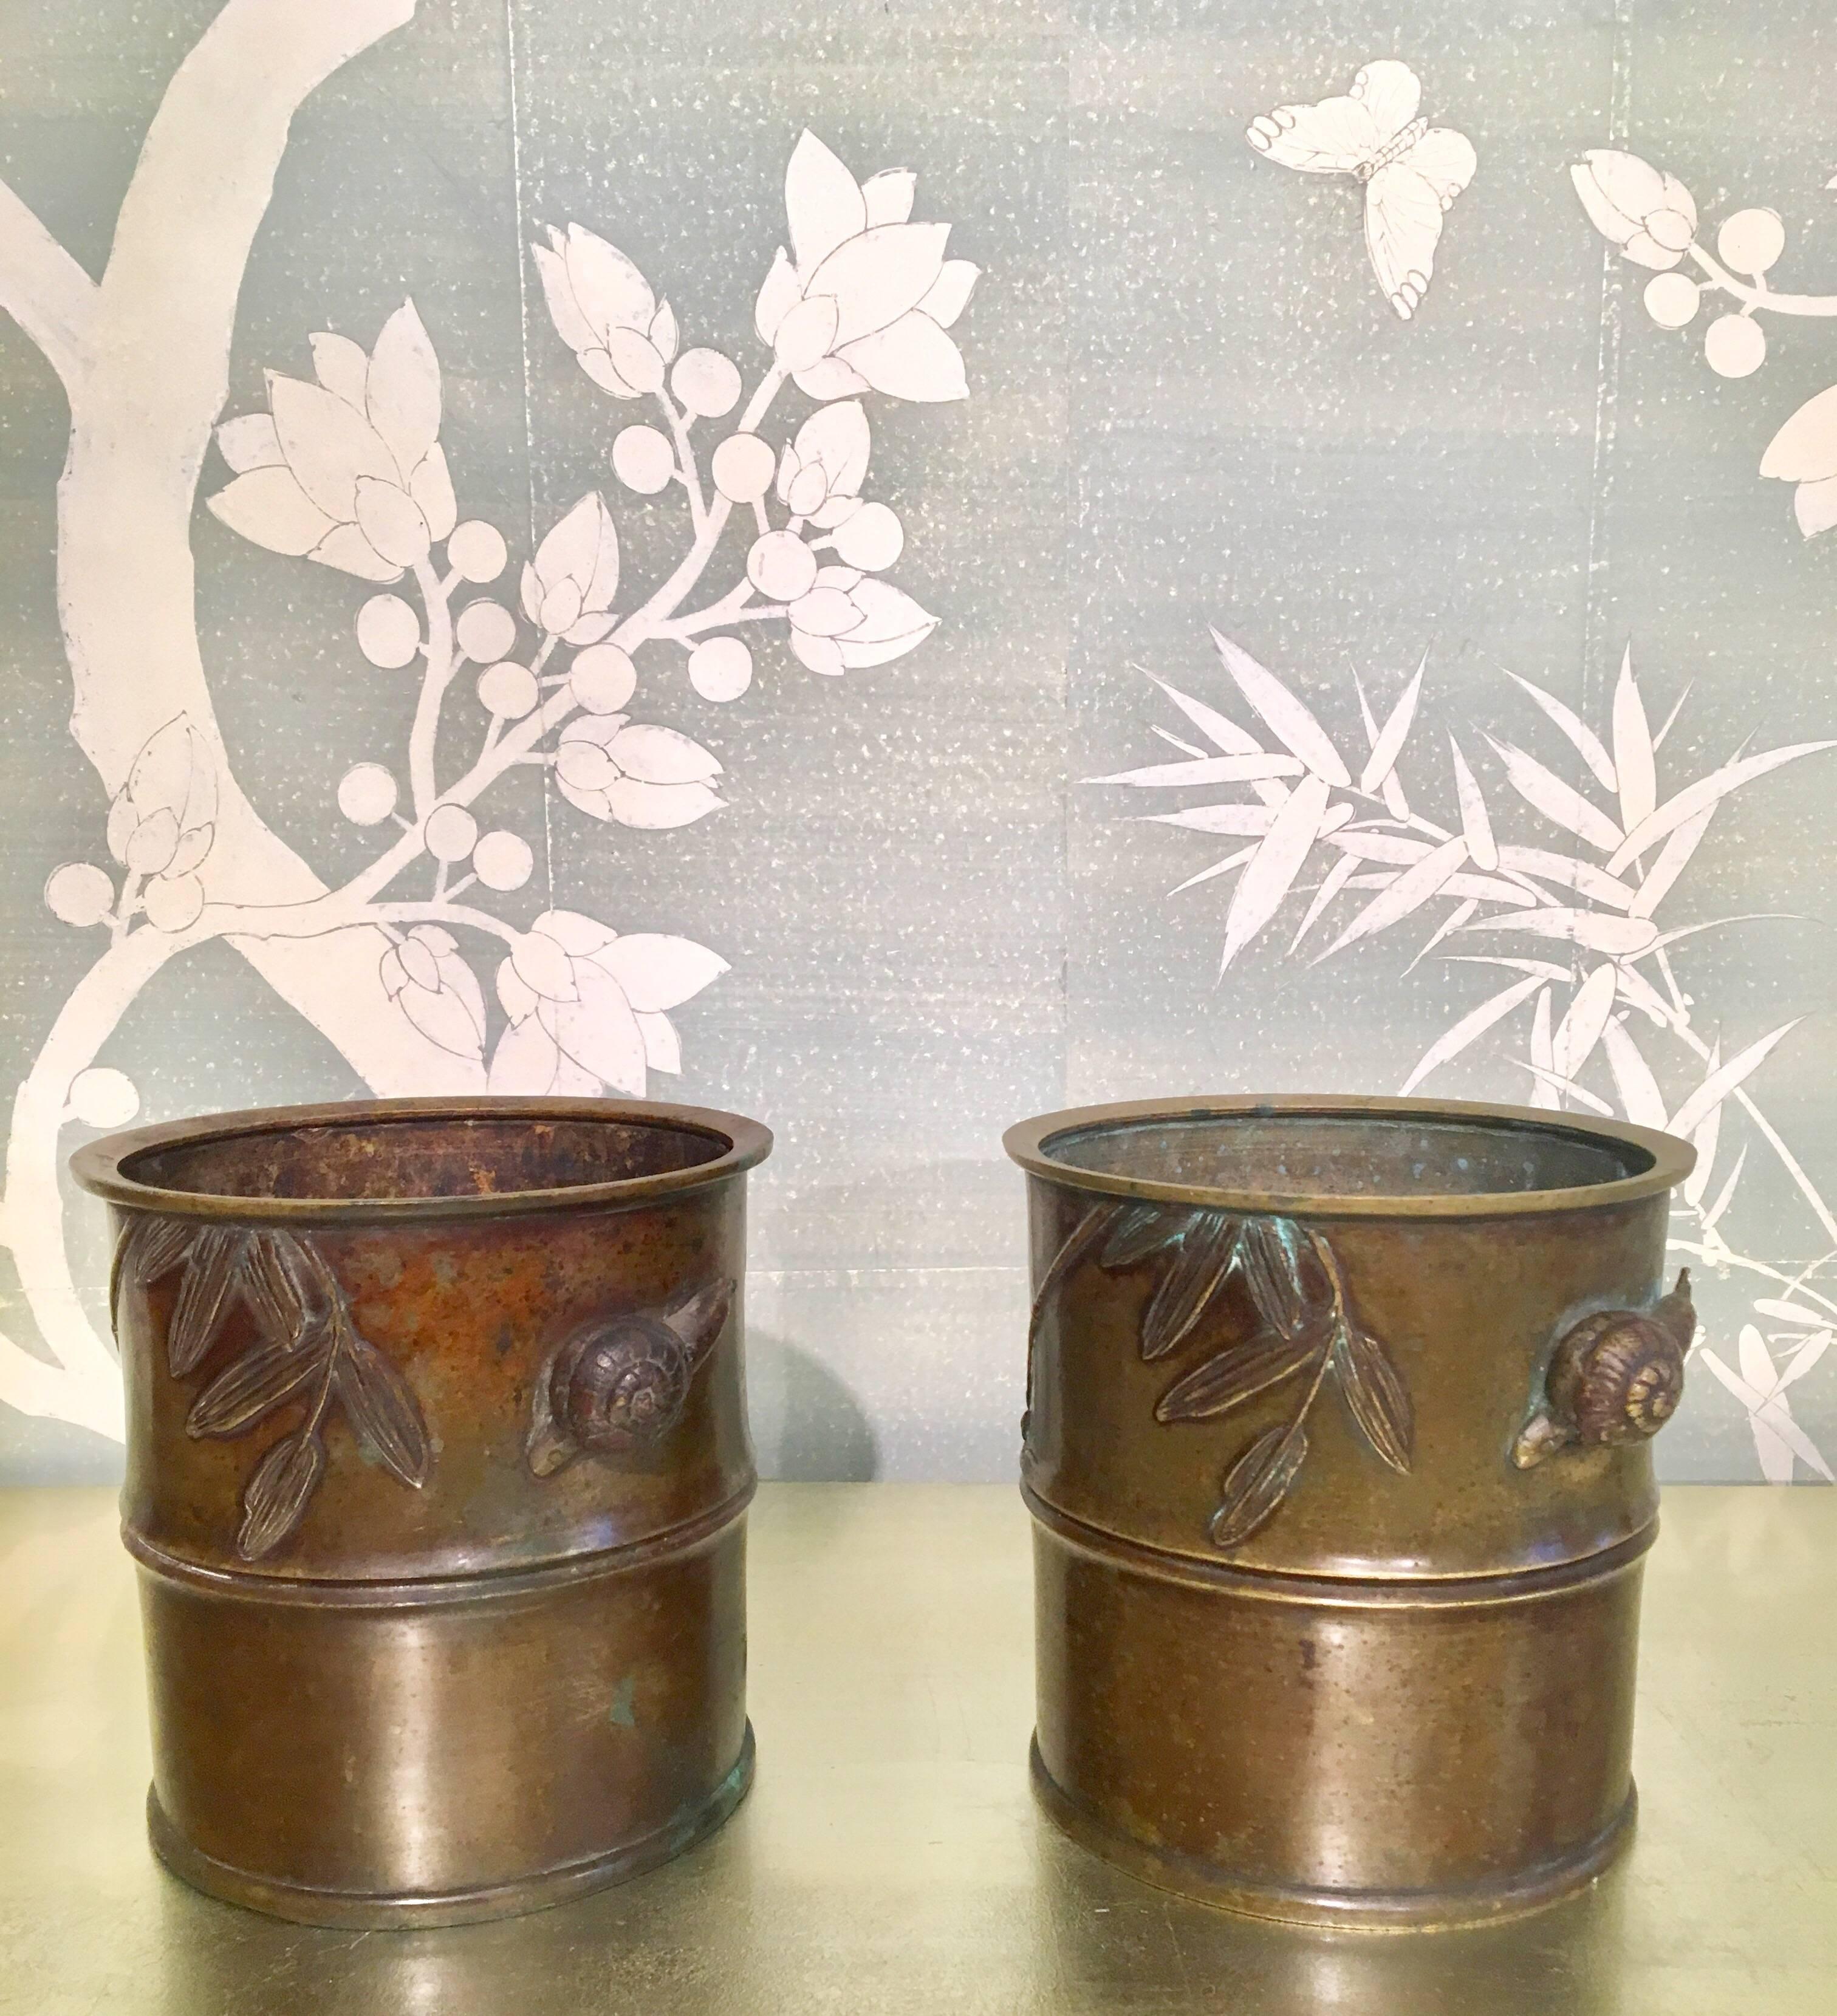 A pair of vintage Japanese brass Japanese braziers, or incense burners, with bamboo design and snail handles.